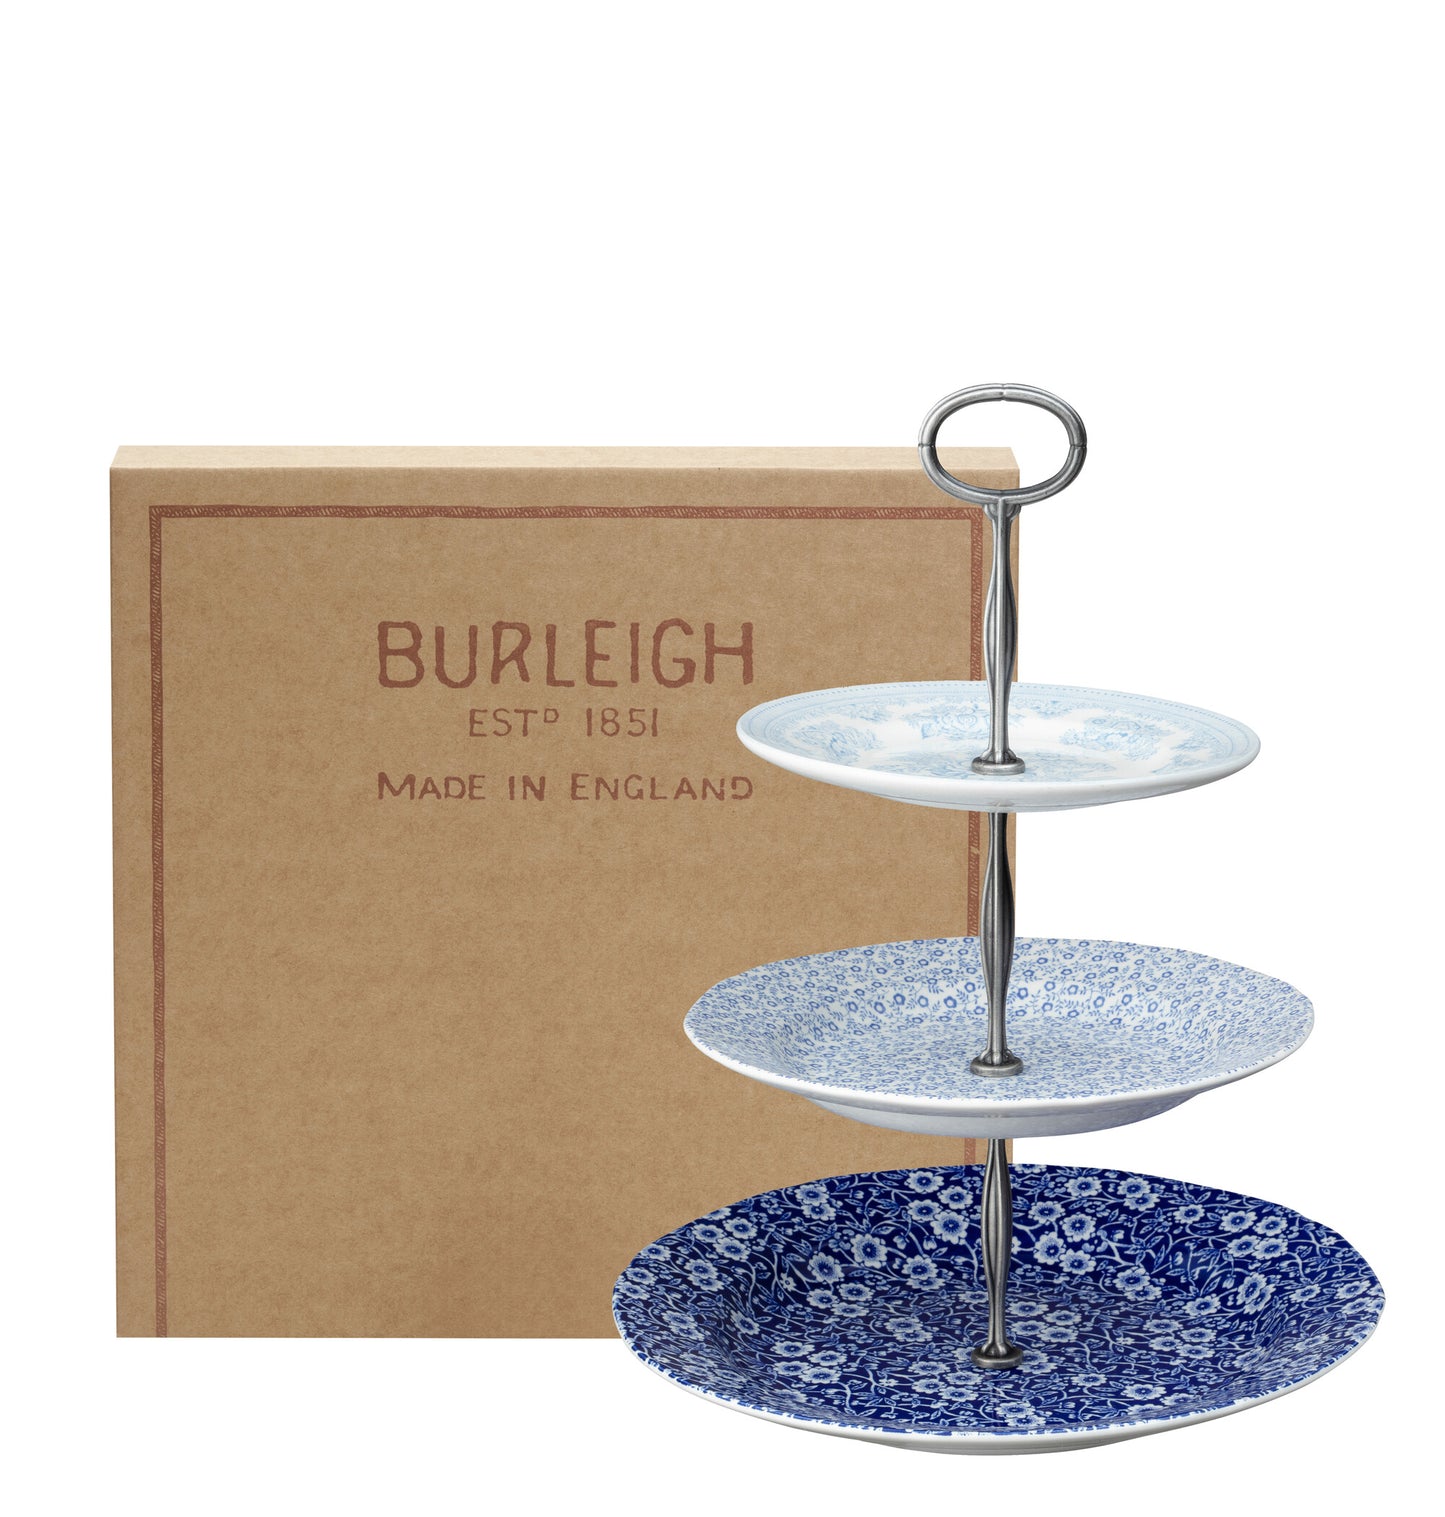 Blue Asiatic Pheasants / Calico / Felicity 3 Tier Cake Stand Gift Boxed (17.5cm, 21.5cm, 26.5cm)